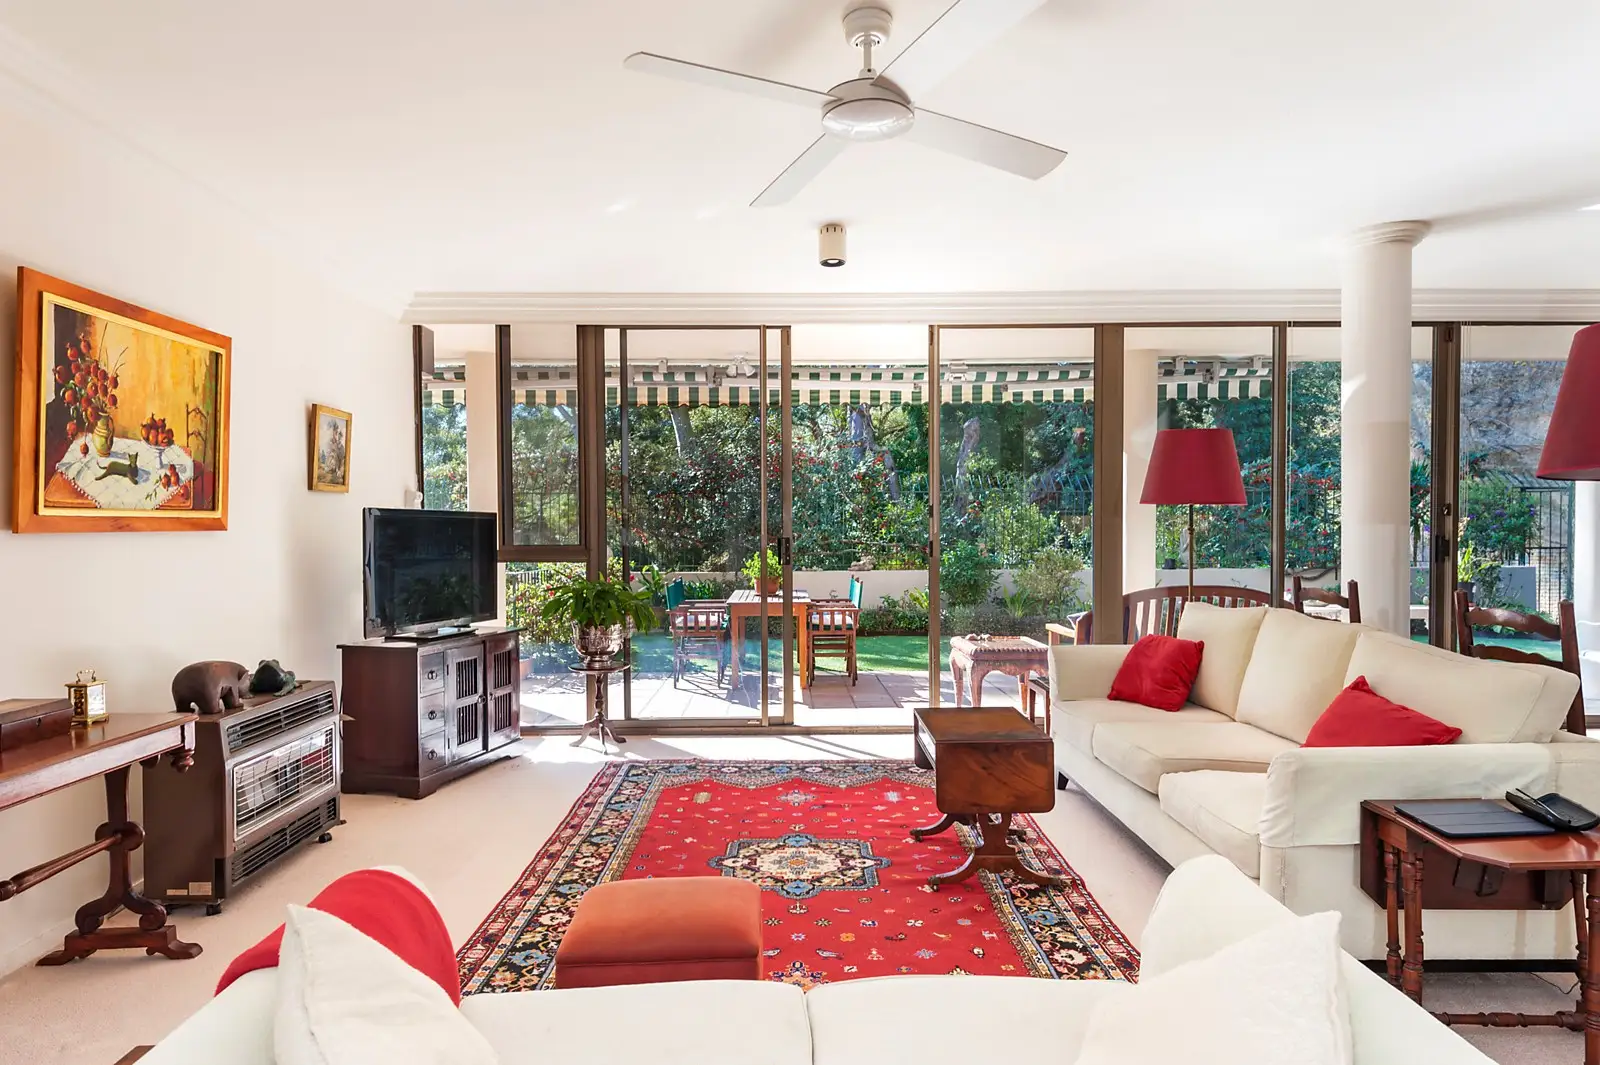 3/8 Fig Tree Lane (3/18 Small Street), Woollahra Sold by Sydney Sotheby's International Realty - image 2